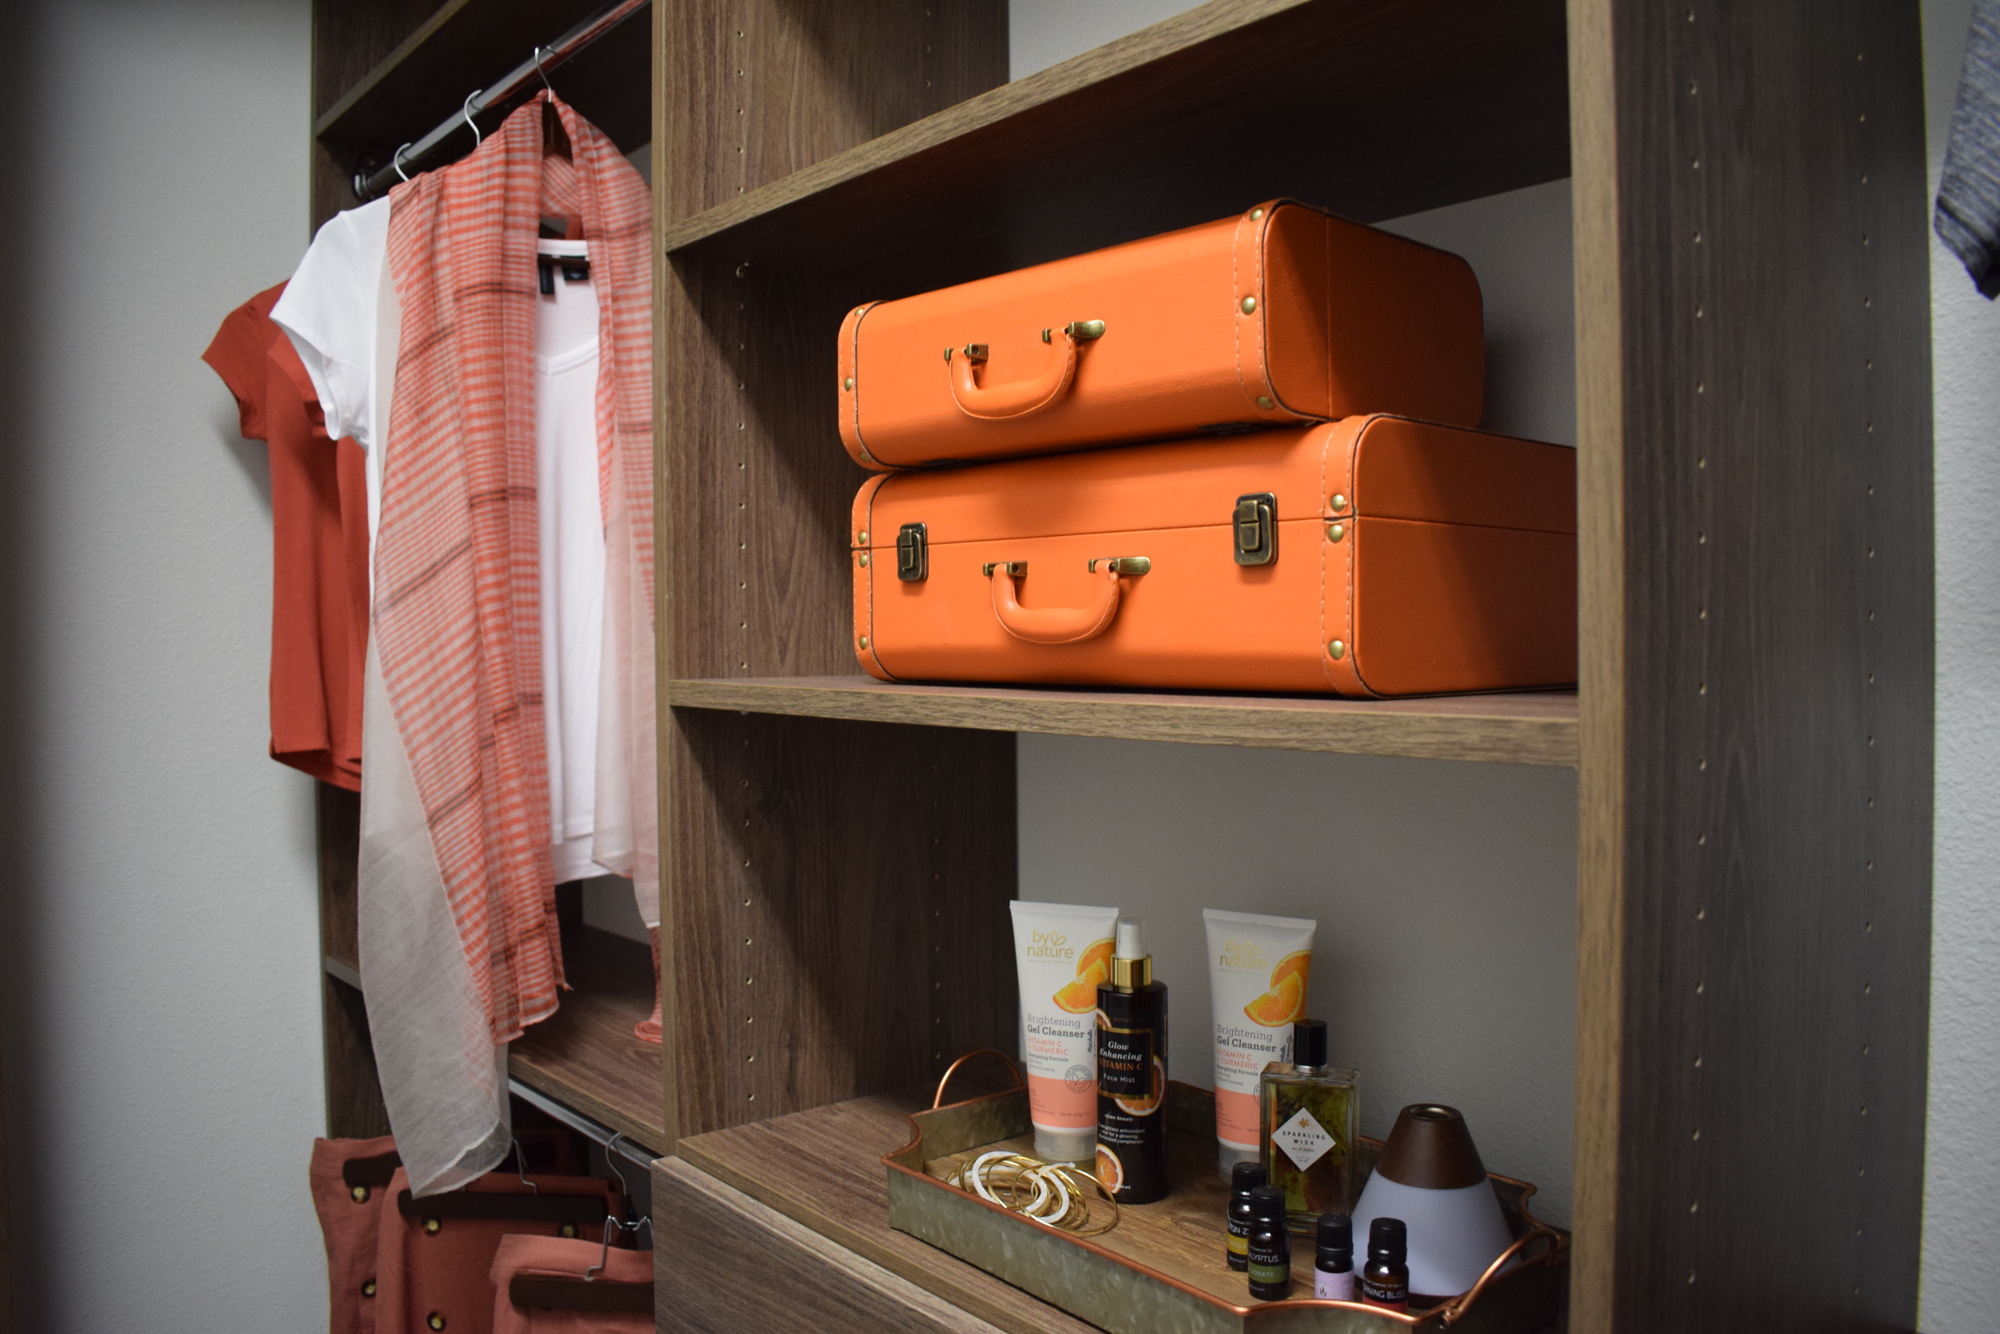 From cosmetics to suitcases, closets are about much more than clothes. This one is in the Cortina model by Neal Communities.